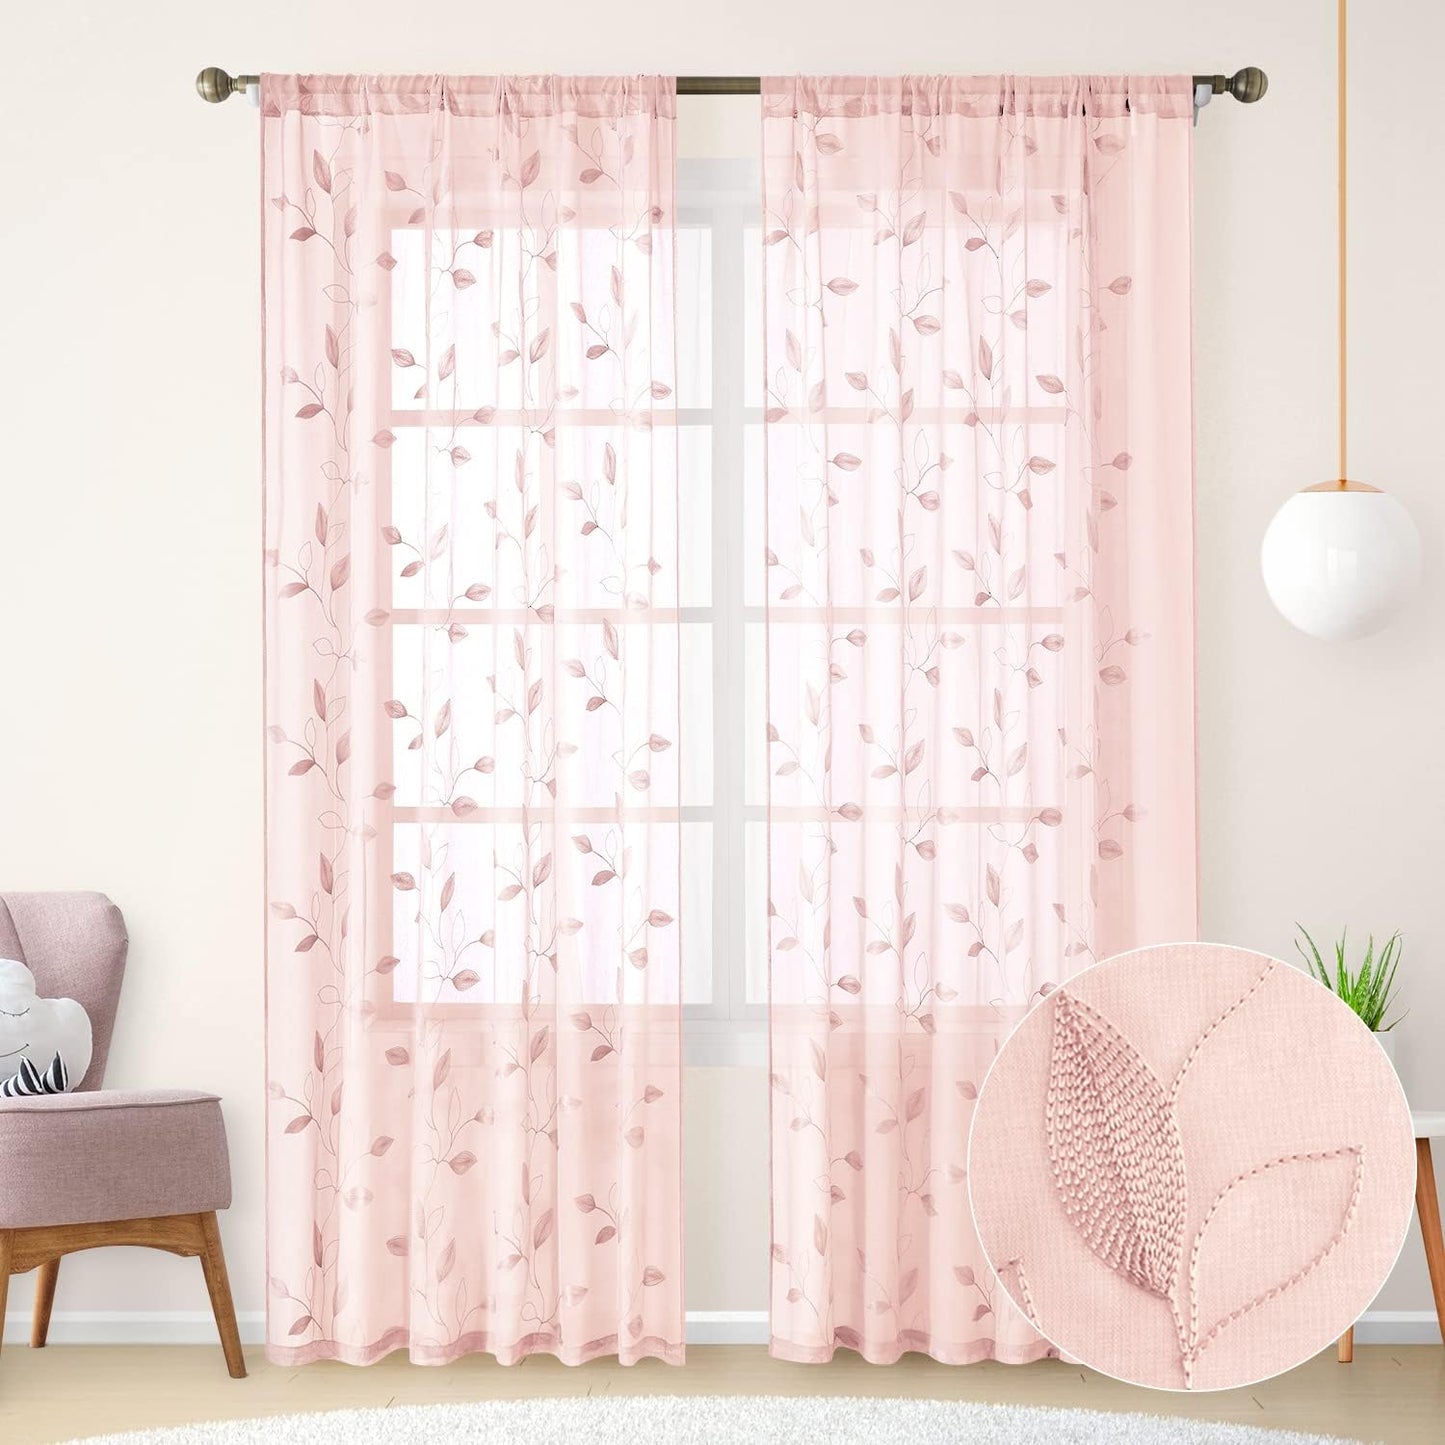 HOMEIDEAS Sage Green Sheer Curtains 52 X 63 Inches Length 2 Panels Embroidered Leaf Pattern Pocket Faux Linen Floral Semi Sheer Voile Window Curtains/Drapes for Bedroom Living Room  HOMEIDEAS 6-Blush Pink W52" X L84" 